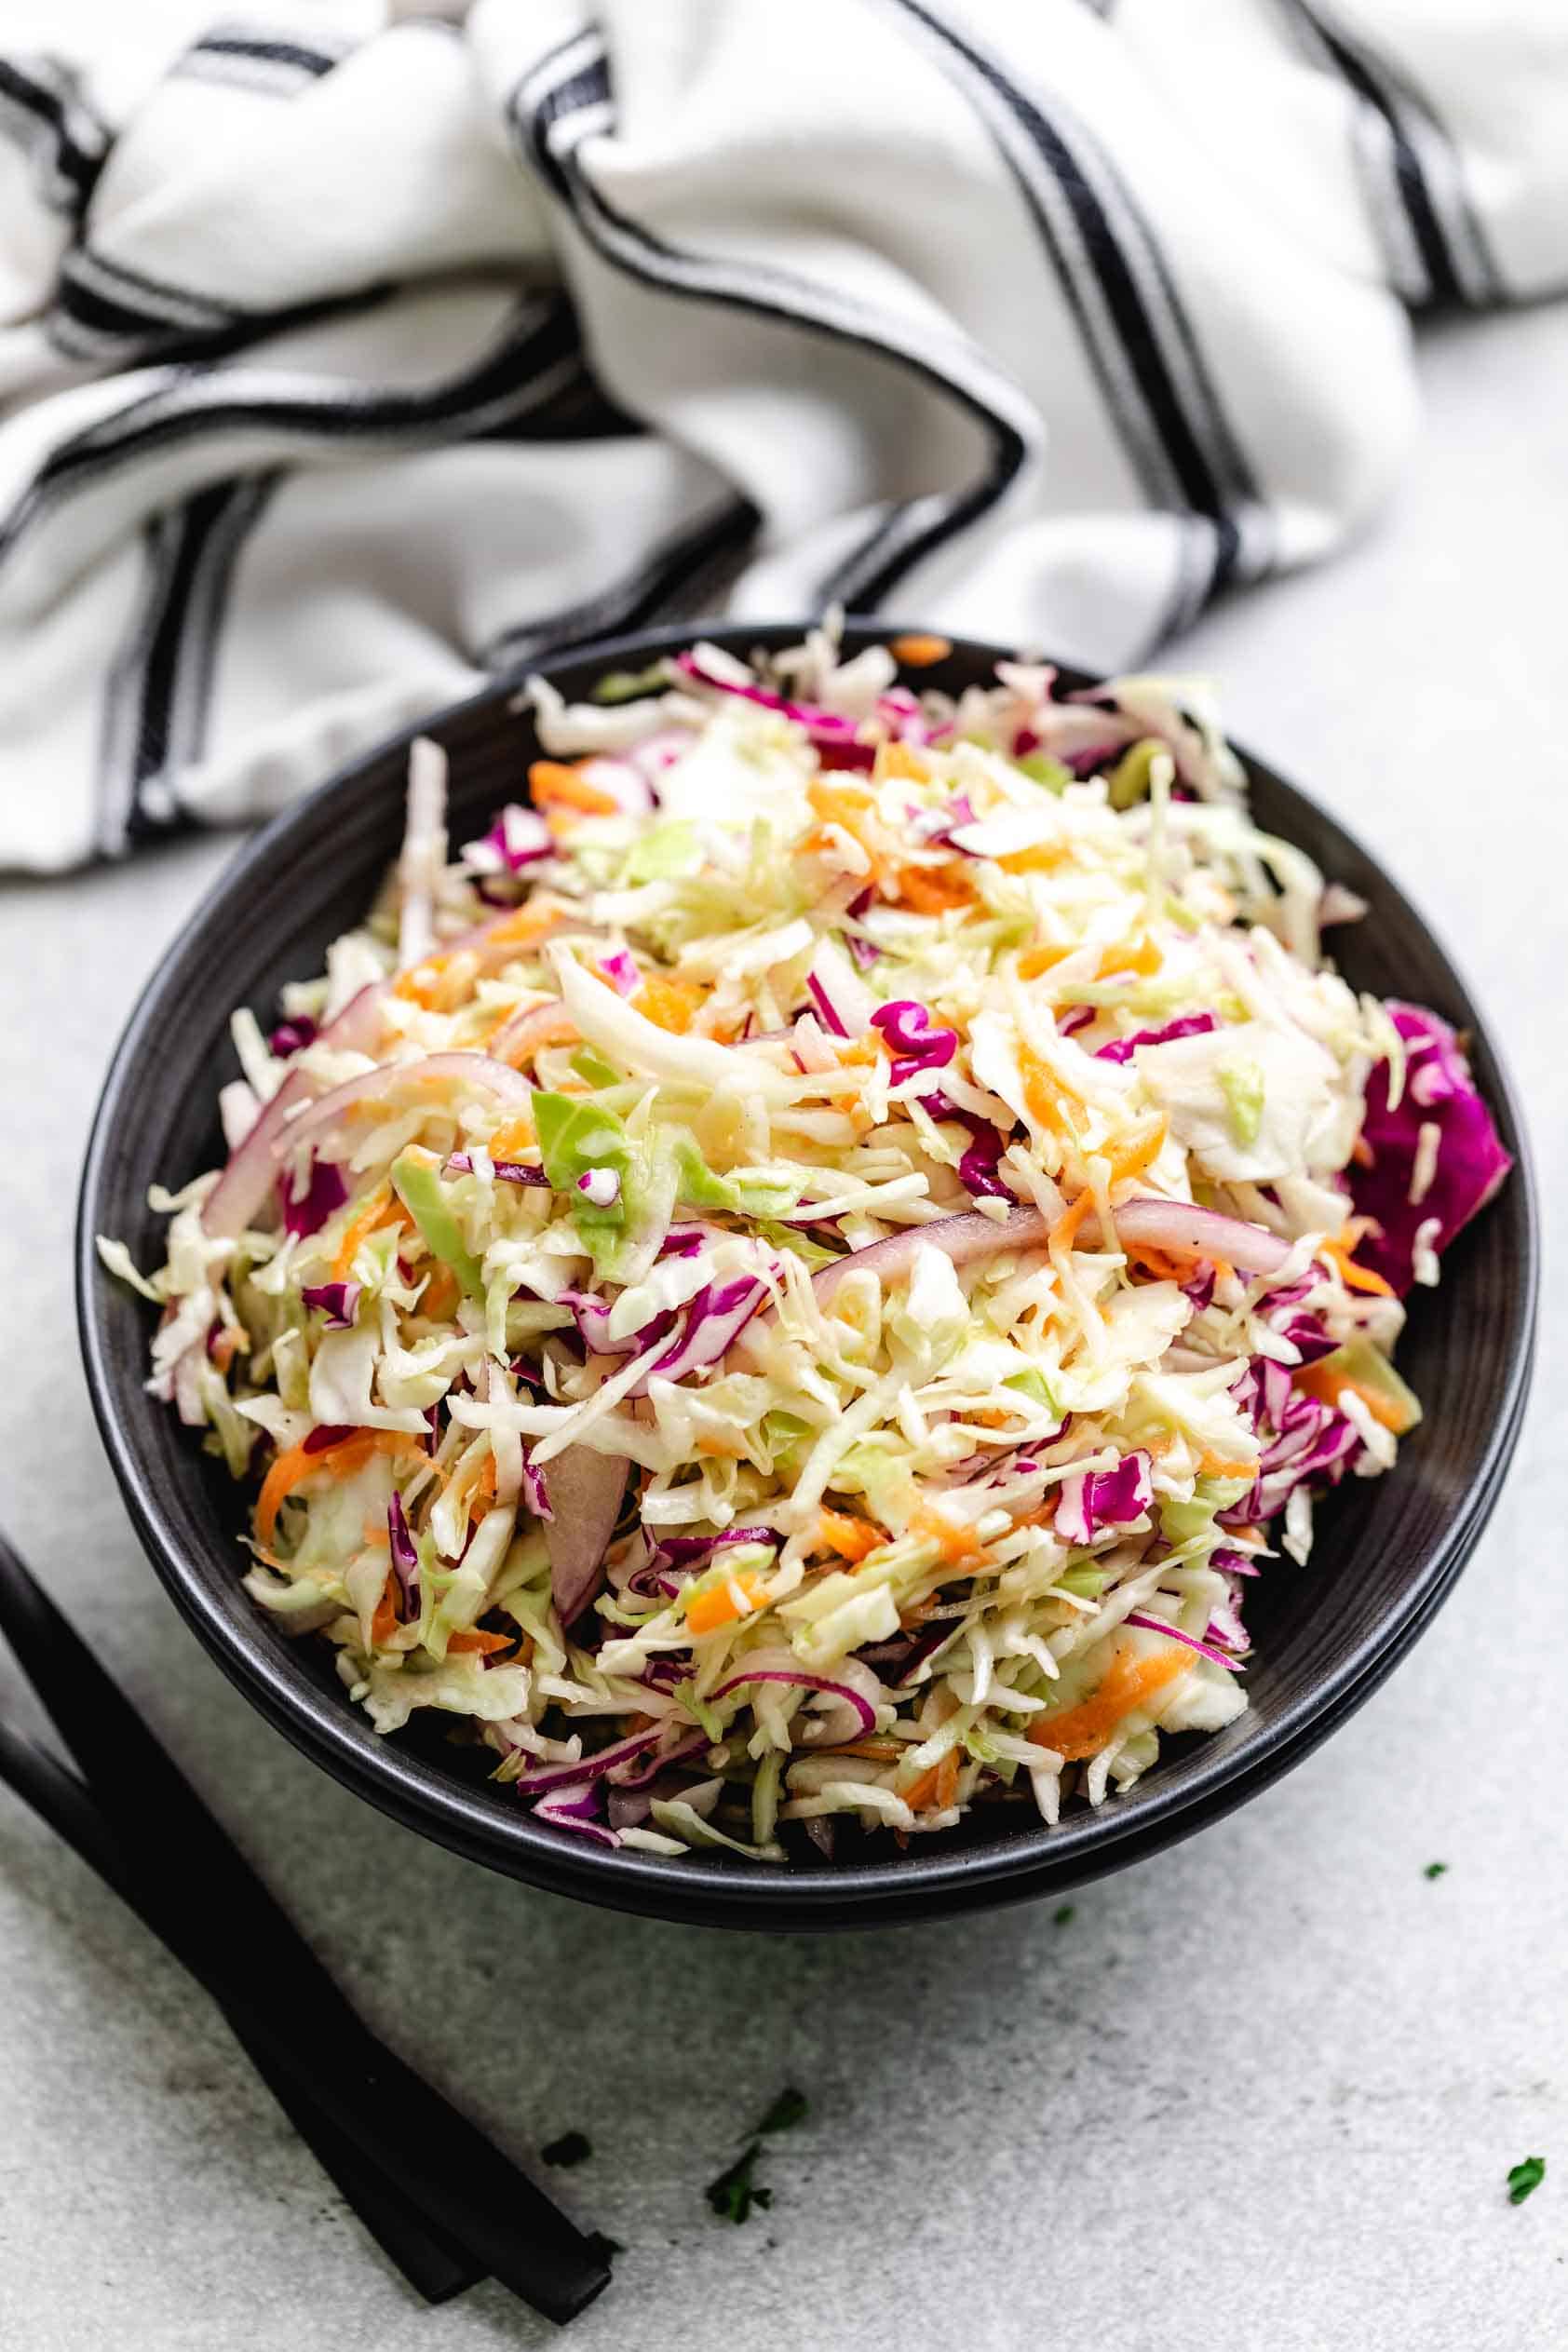 Colorful coleslaw in a bowl.